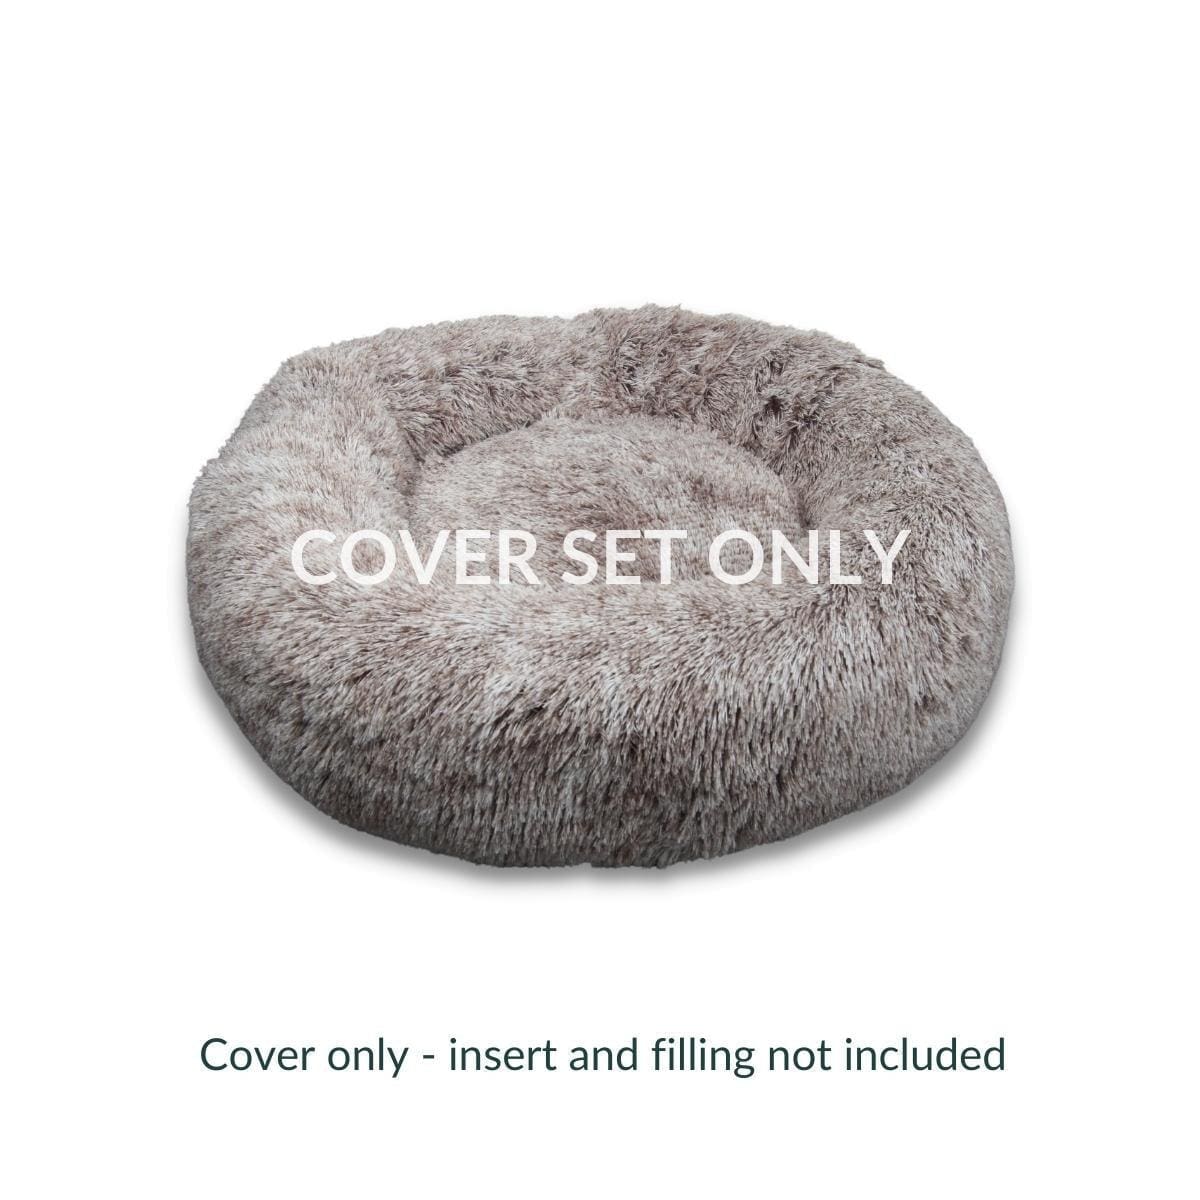 Calming Dog Bed Spare Cover - The Calming Dog Bed